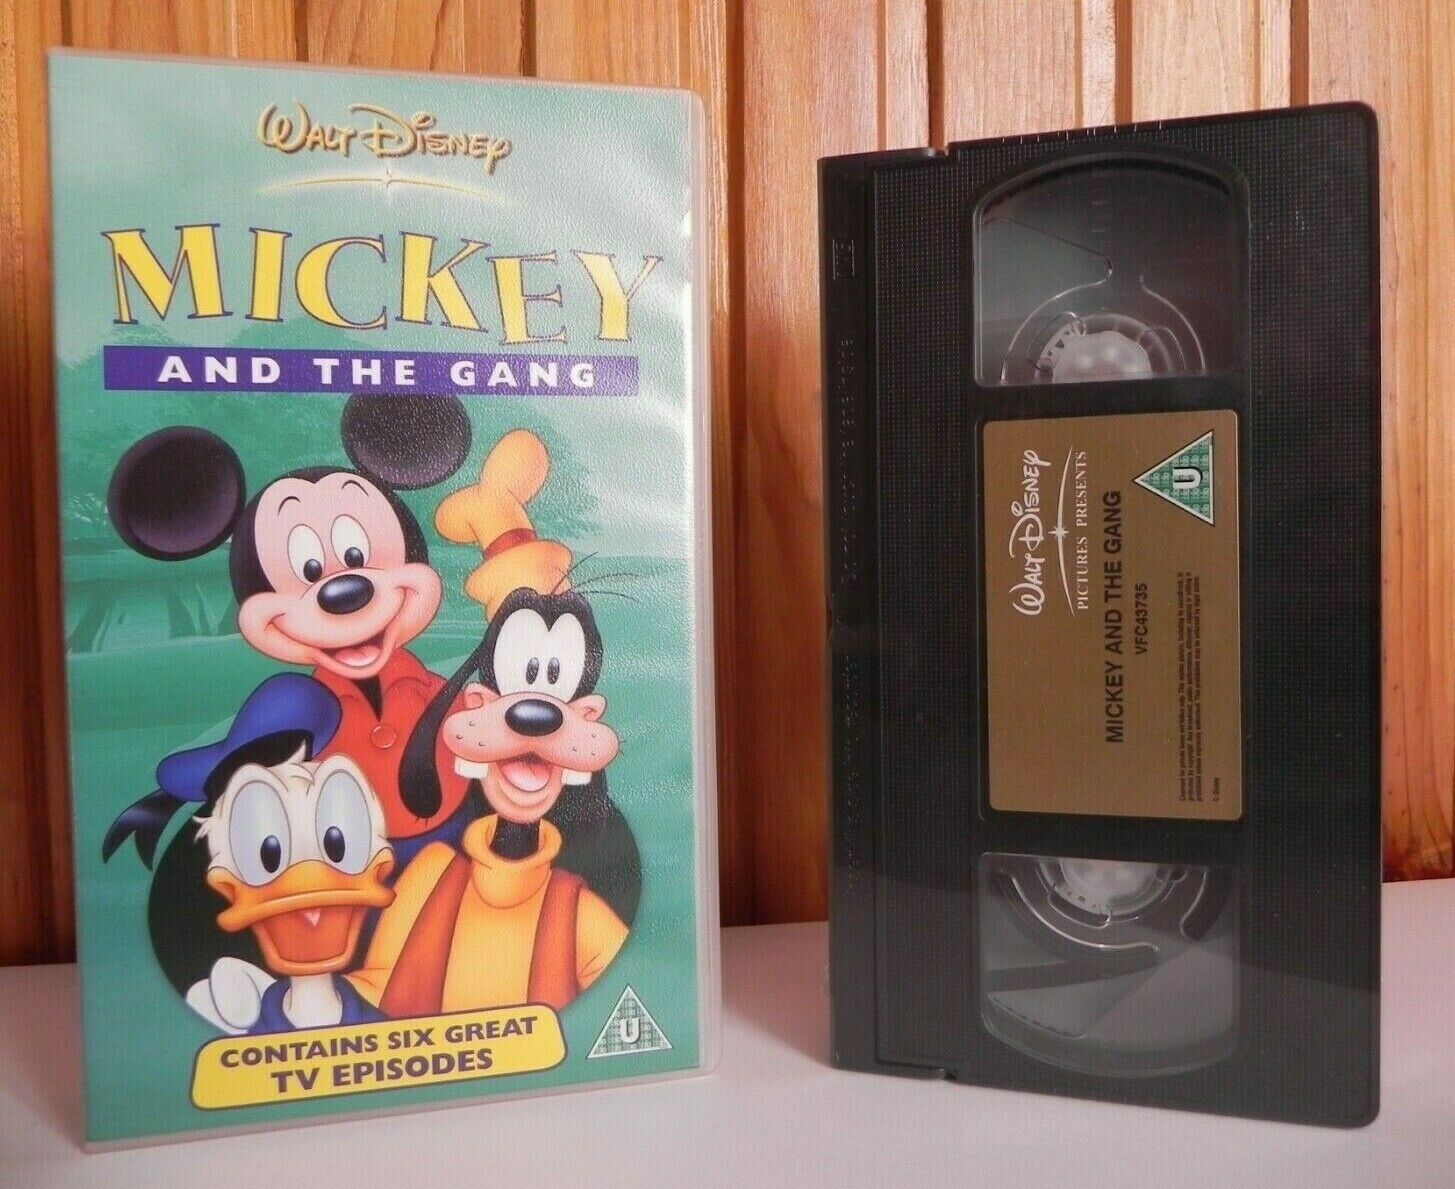 Mickey And The Gang: Brand New Sealed - Walt Disney - Animated - Kids - VHS-